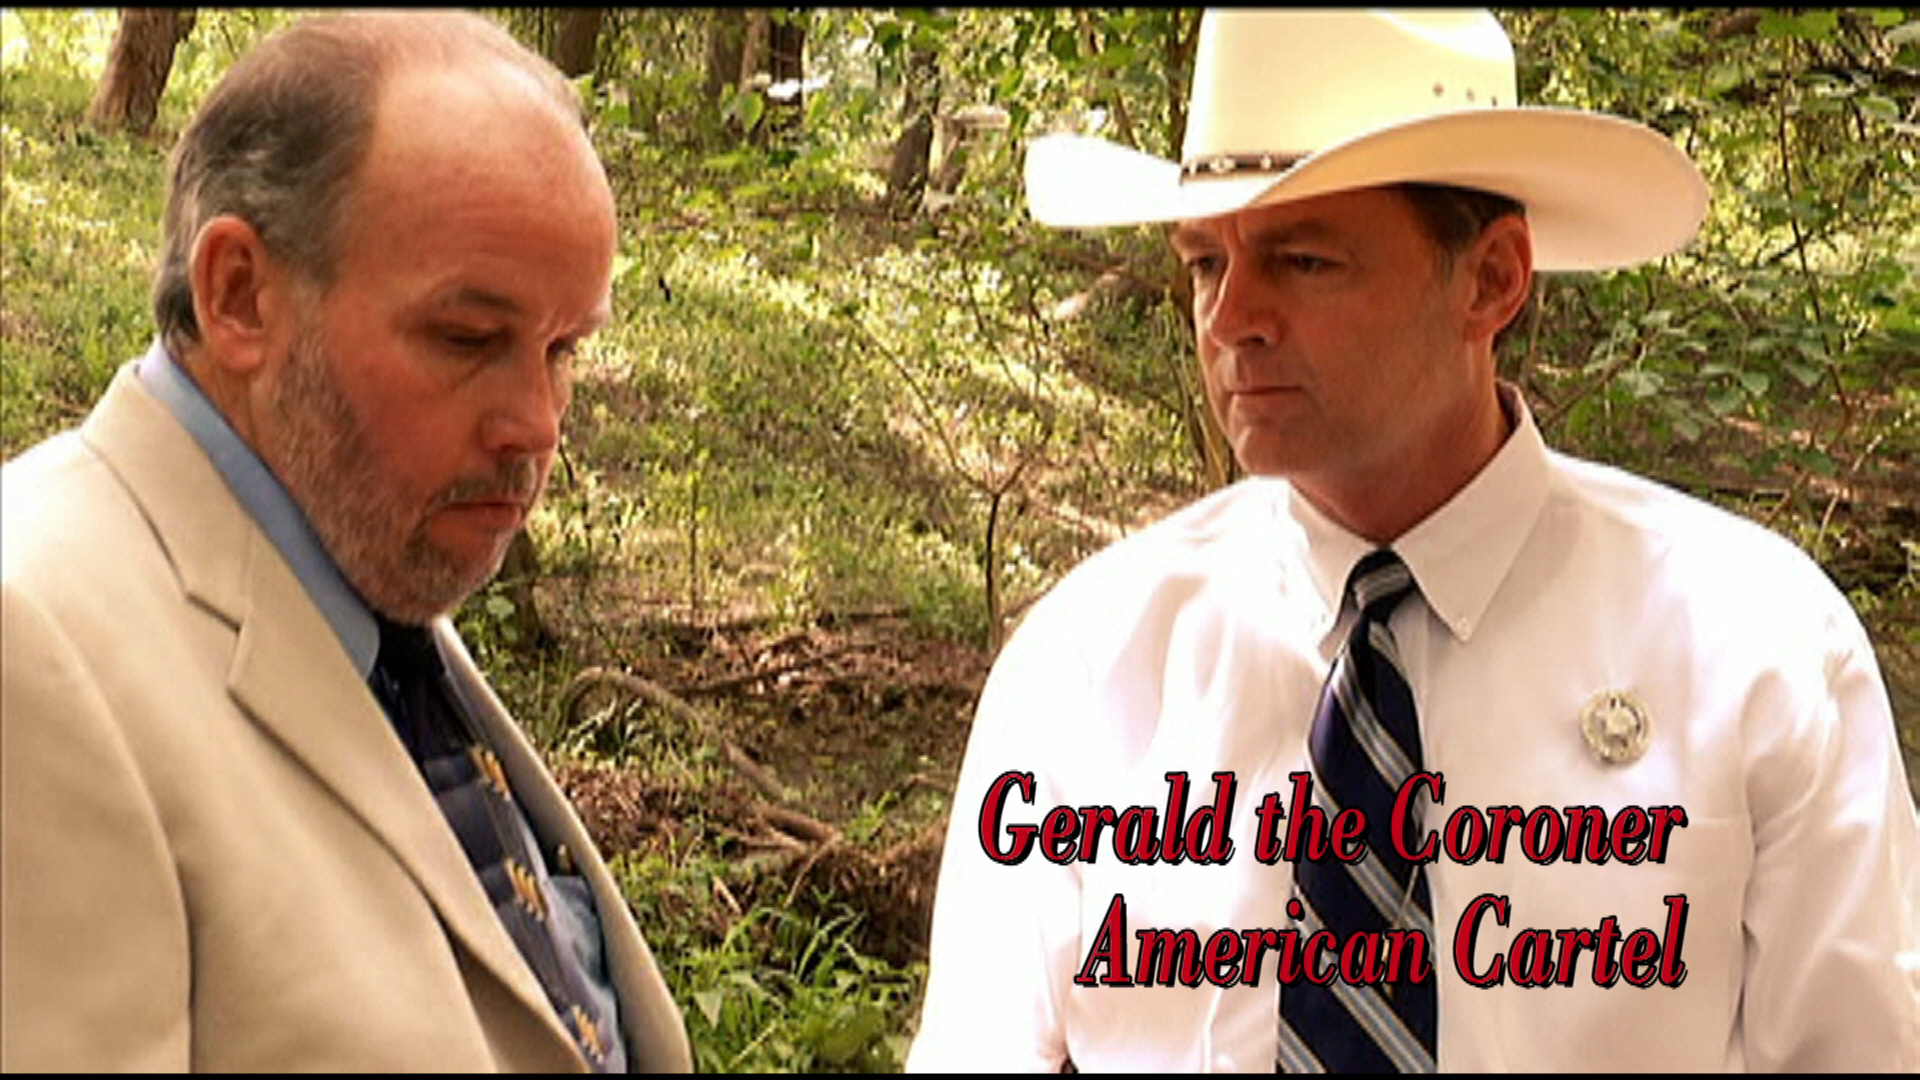 Feature film, American Cartel Gerald, the Coroner with the films star Todd Allen